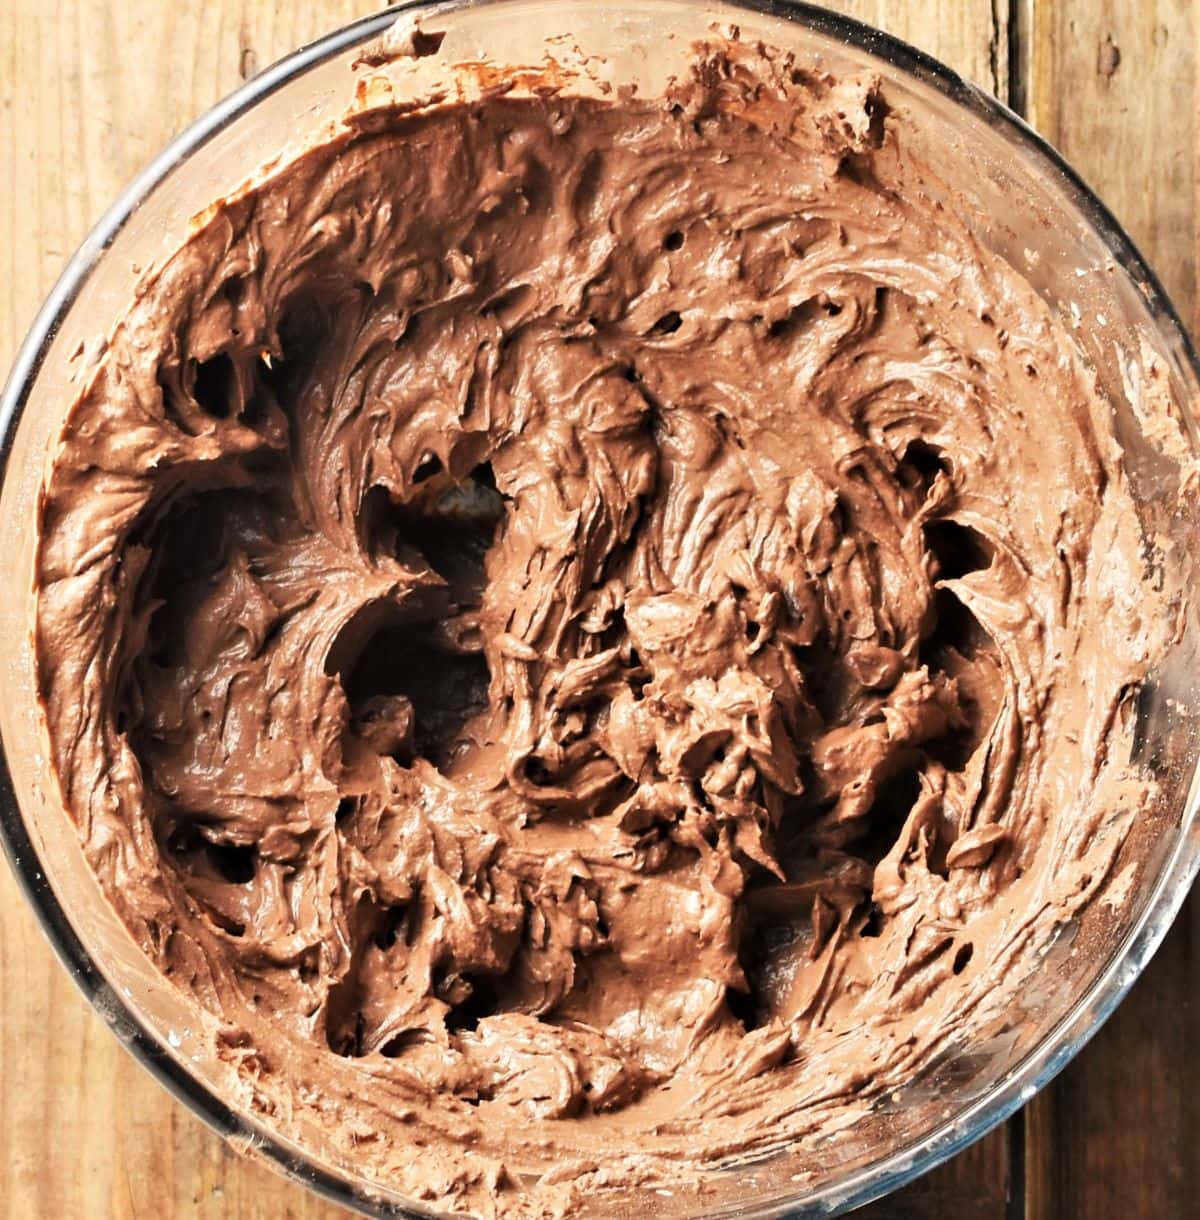 Chocolate cheesecake filling mixture in bowl.